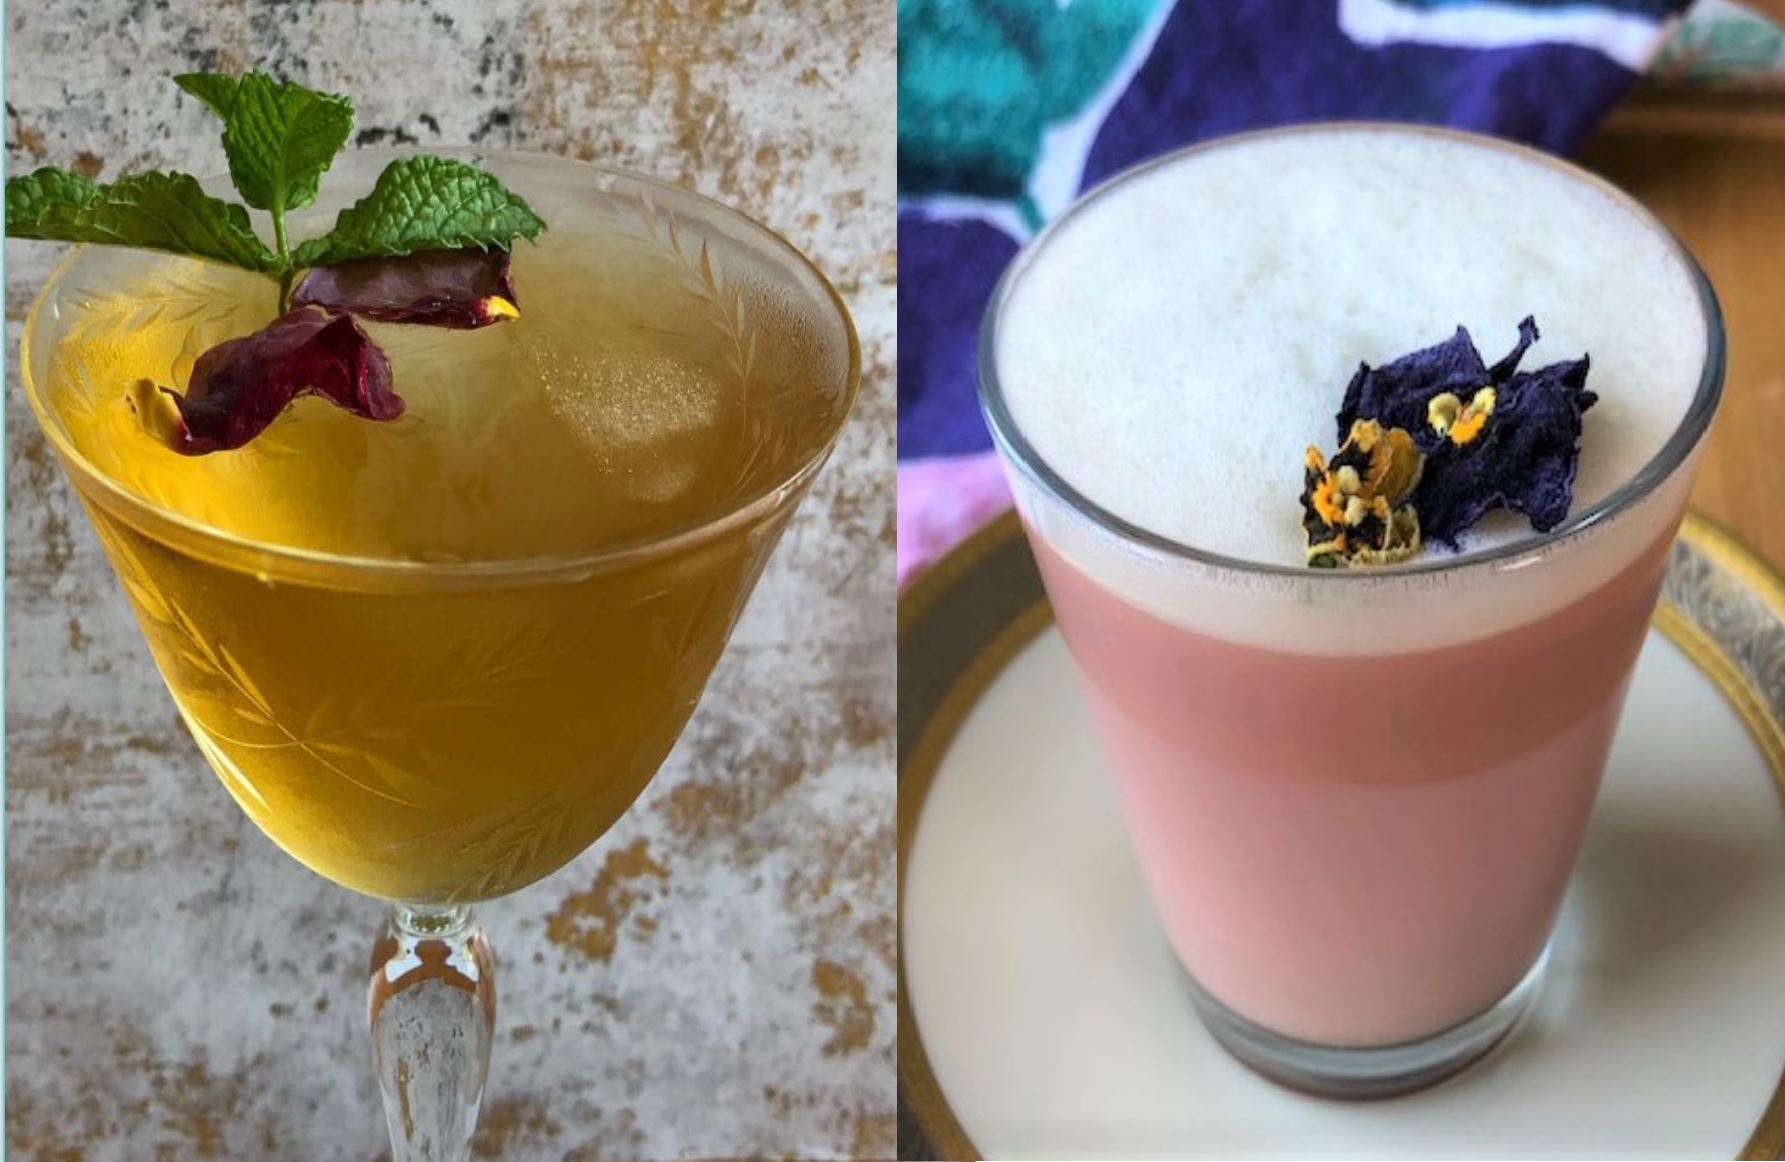 Iced tea in a cocktail glass, garnished with rose petals and mint and a pint latte garnished with edible pansy flowers